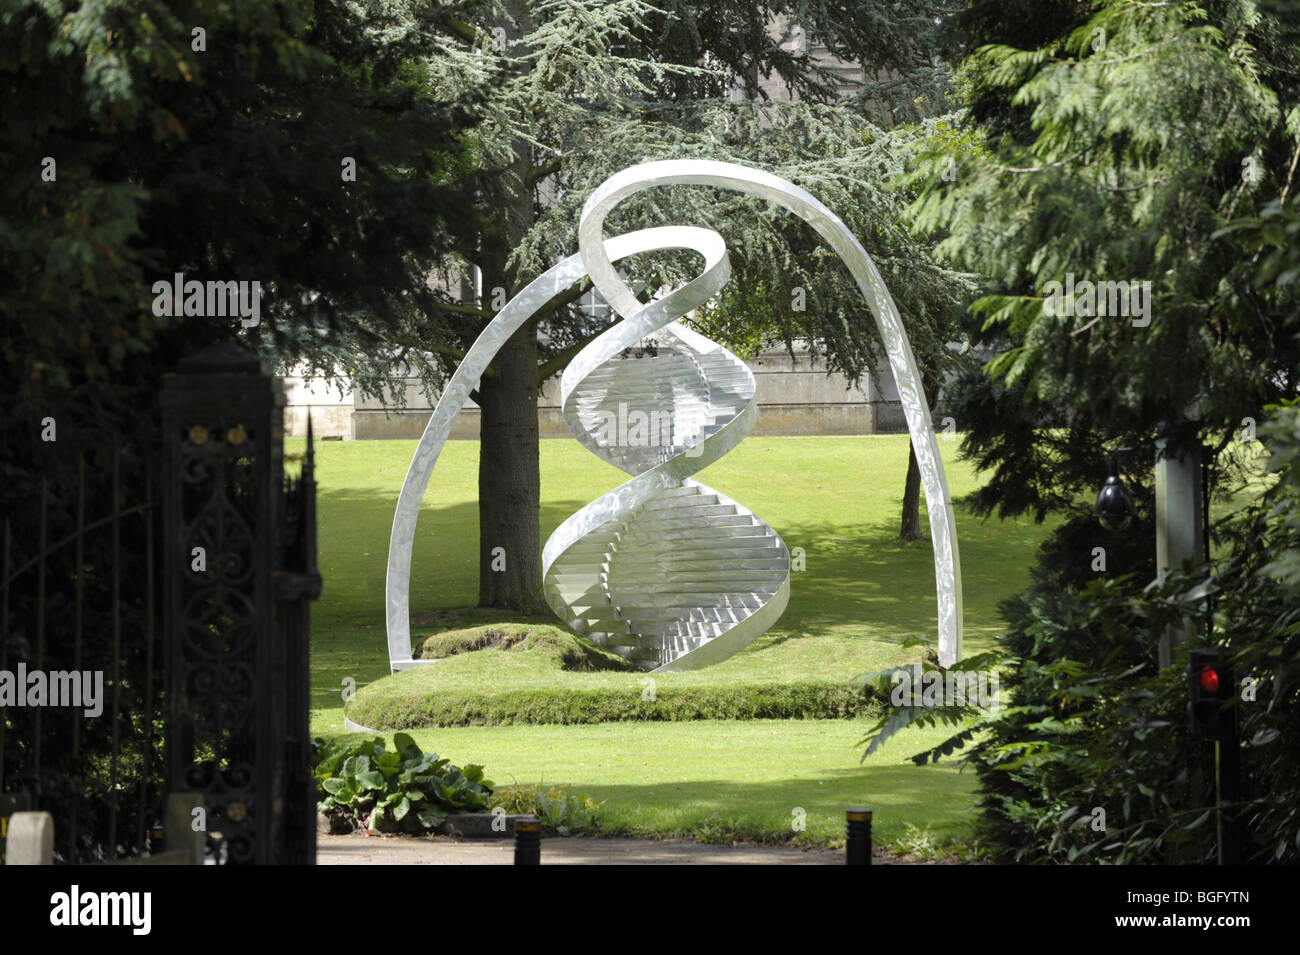 Sculpture by Charles Jencks of DNA double helix at Clare College, Cambridge University Stock Photo